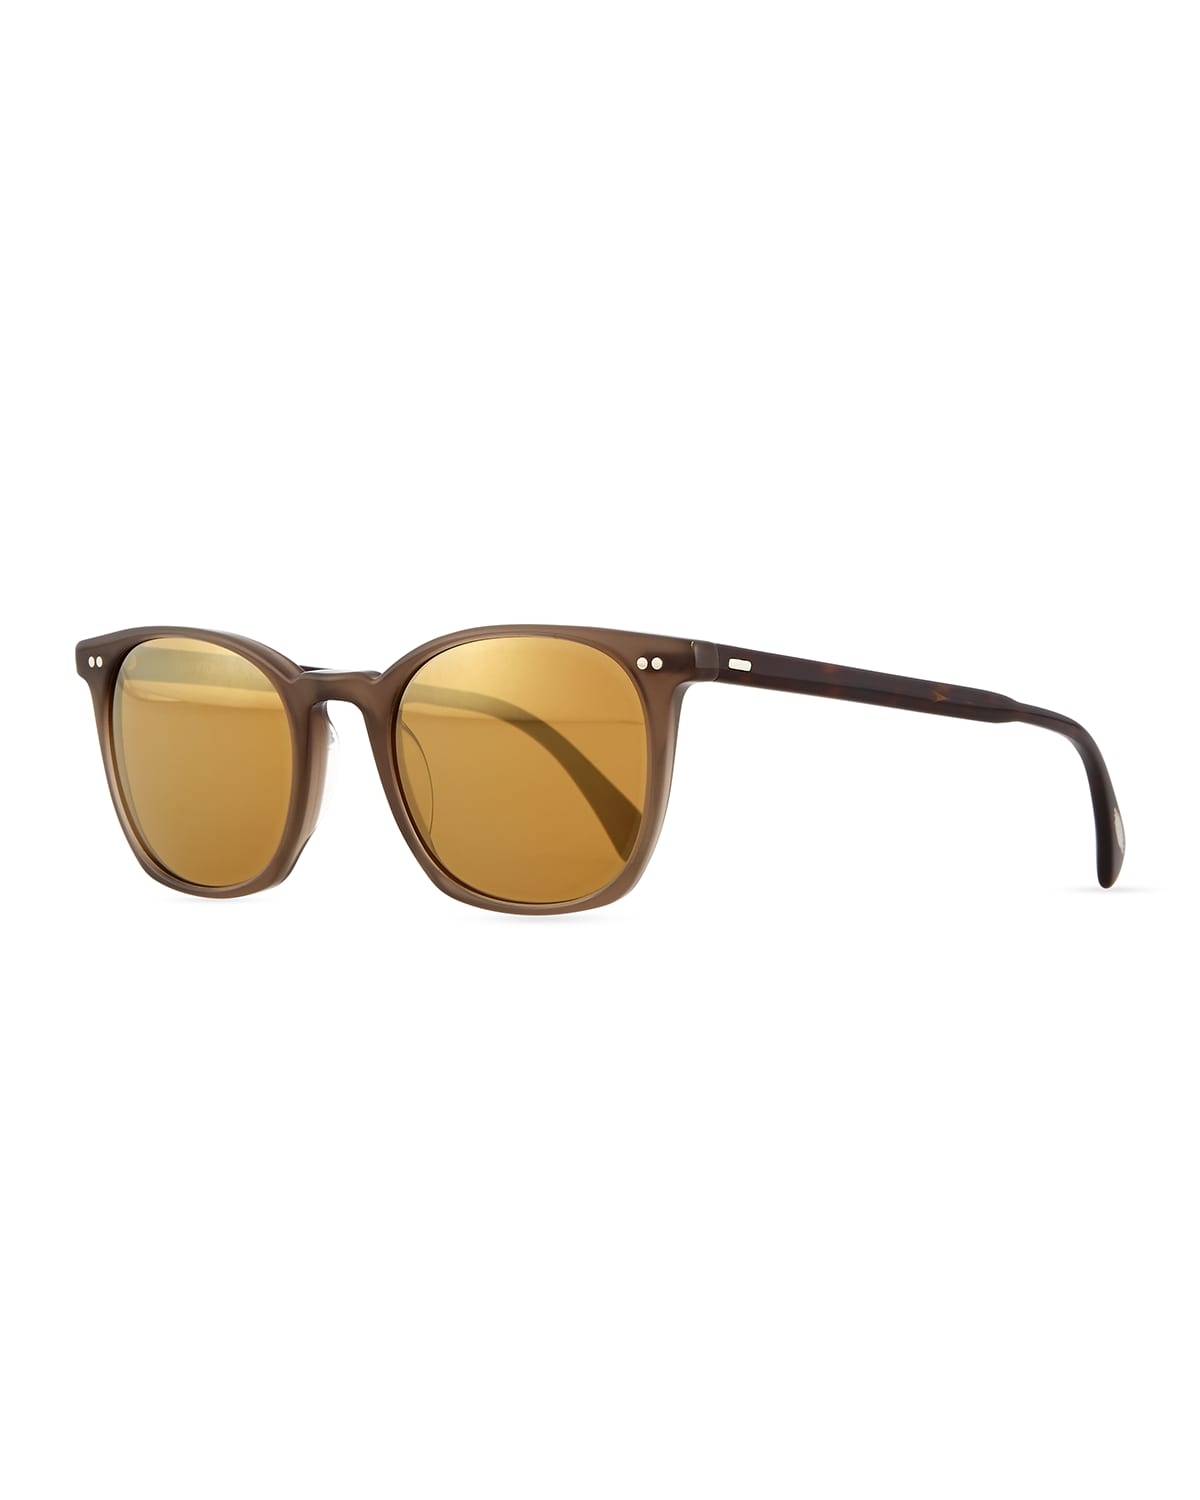 Oliver Peoples . Coen Universal-Fit Sunglasses